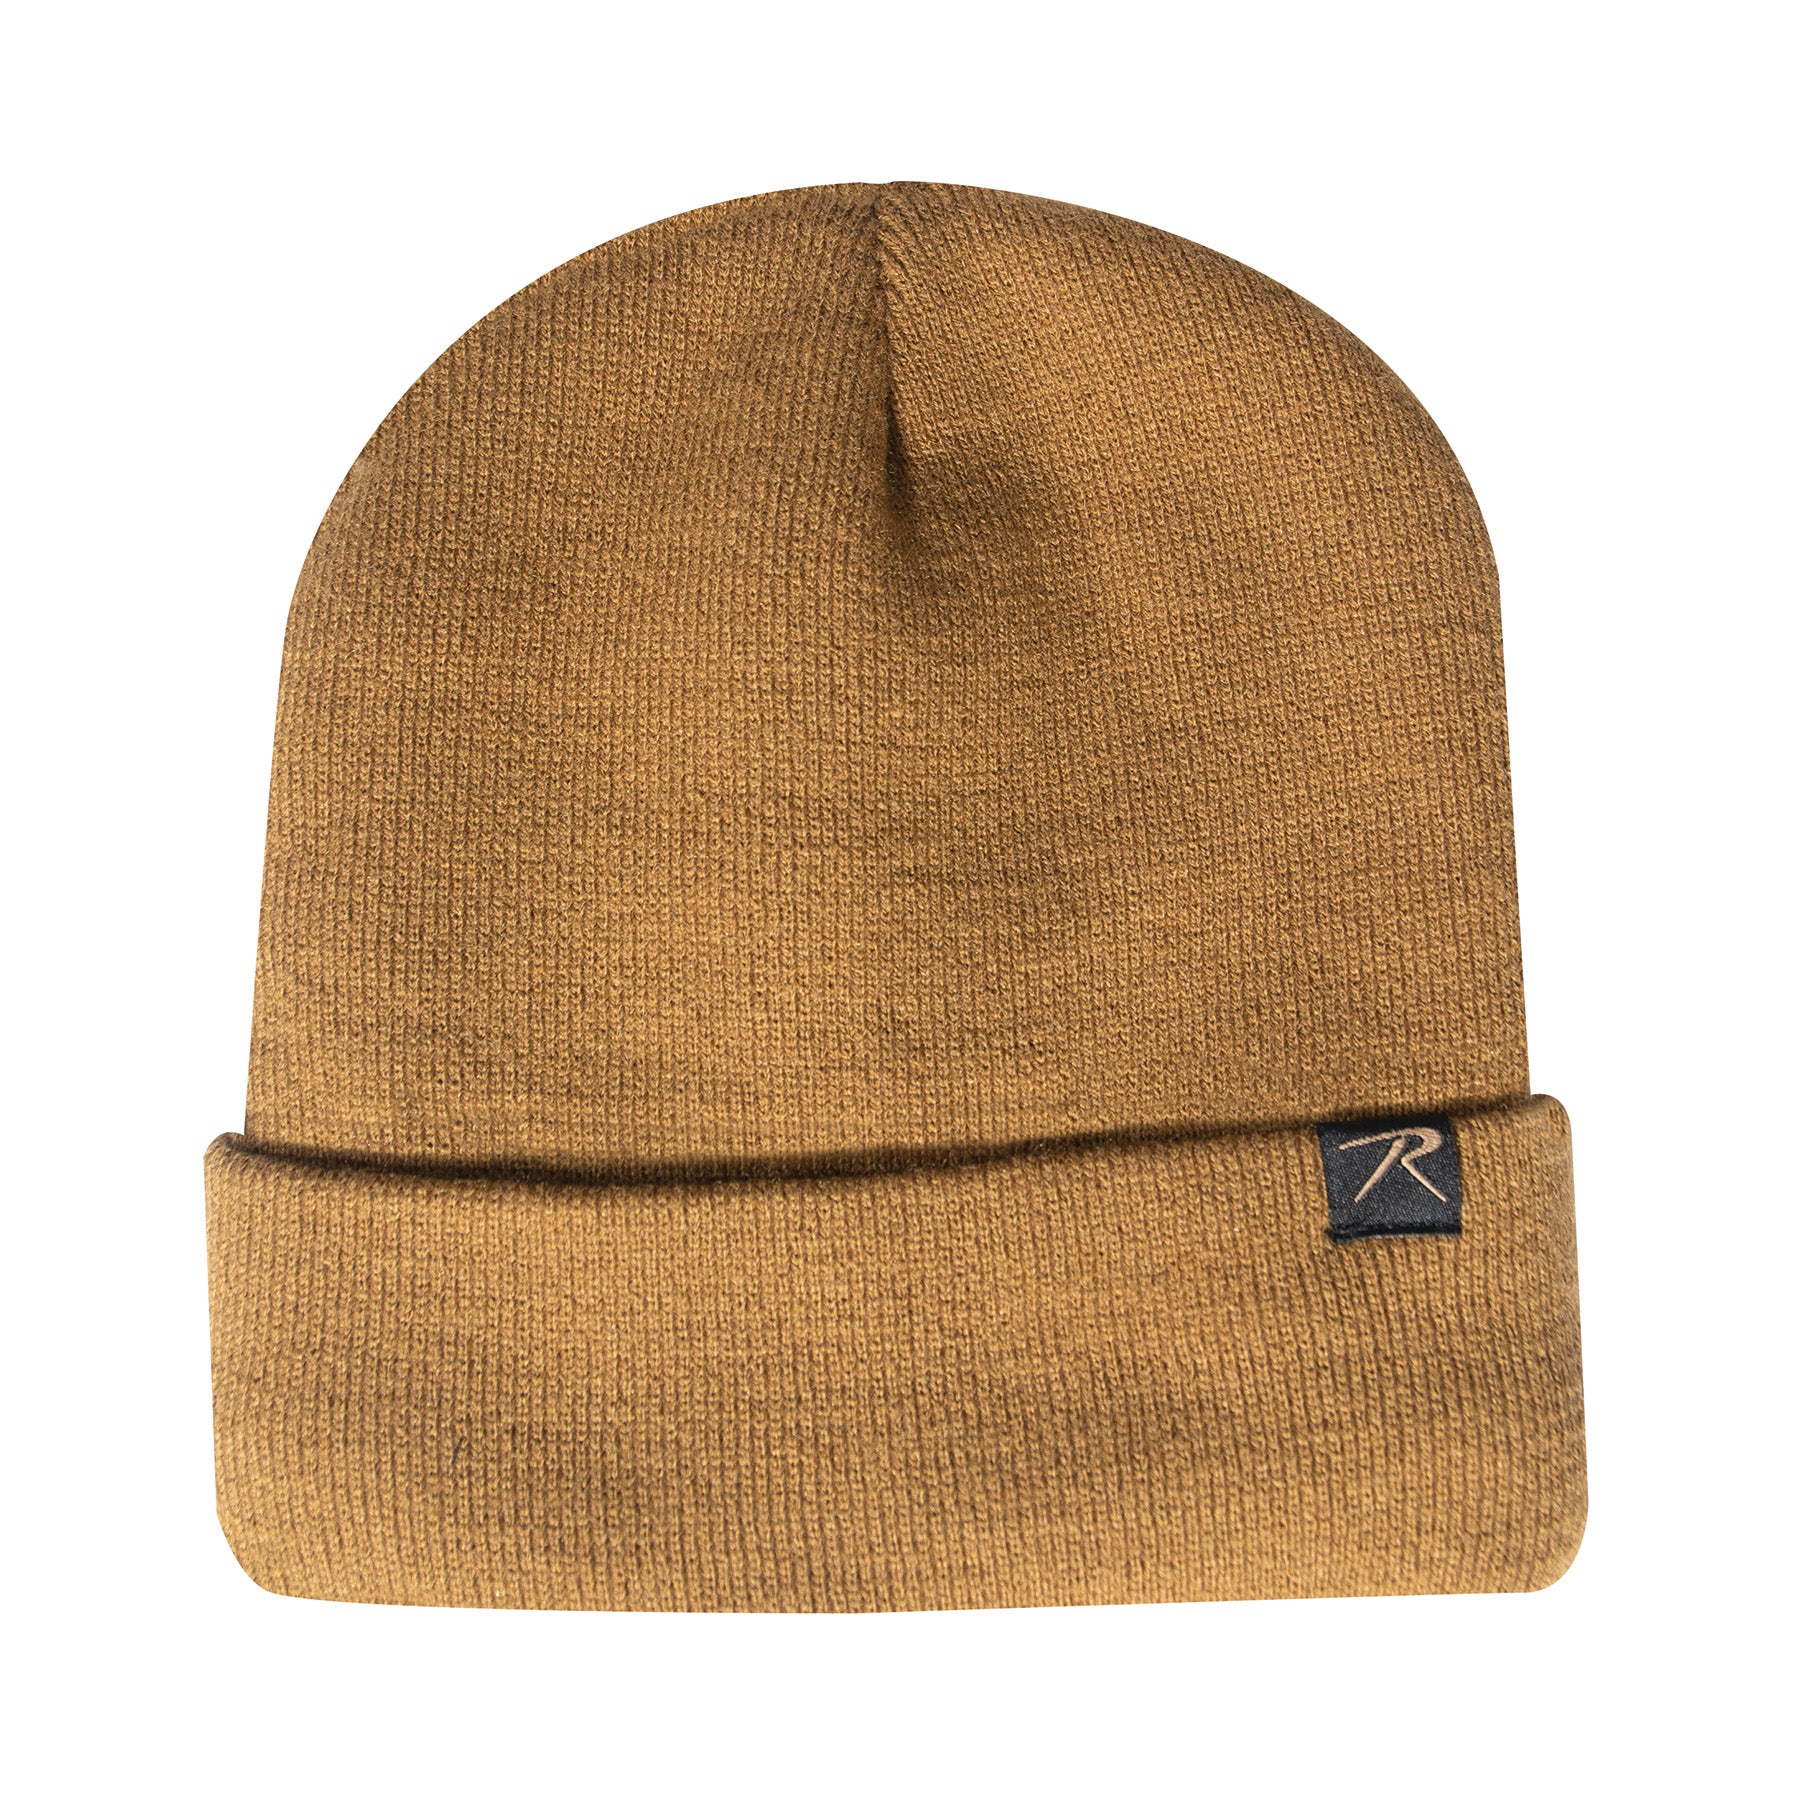 Rothco Deluxe Fine Knit Sherpa-Lined Watch Cap